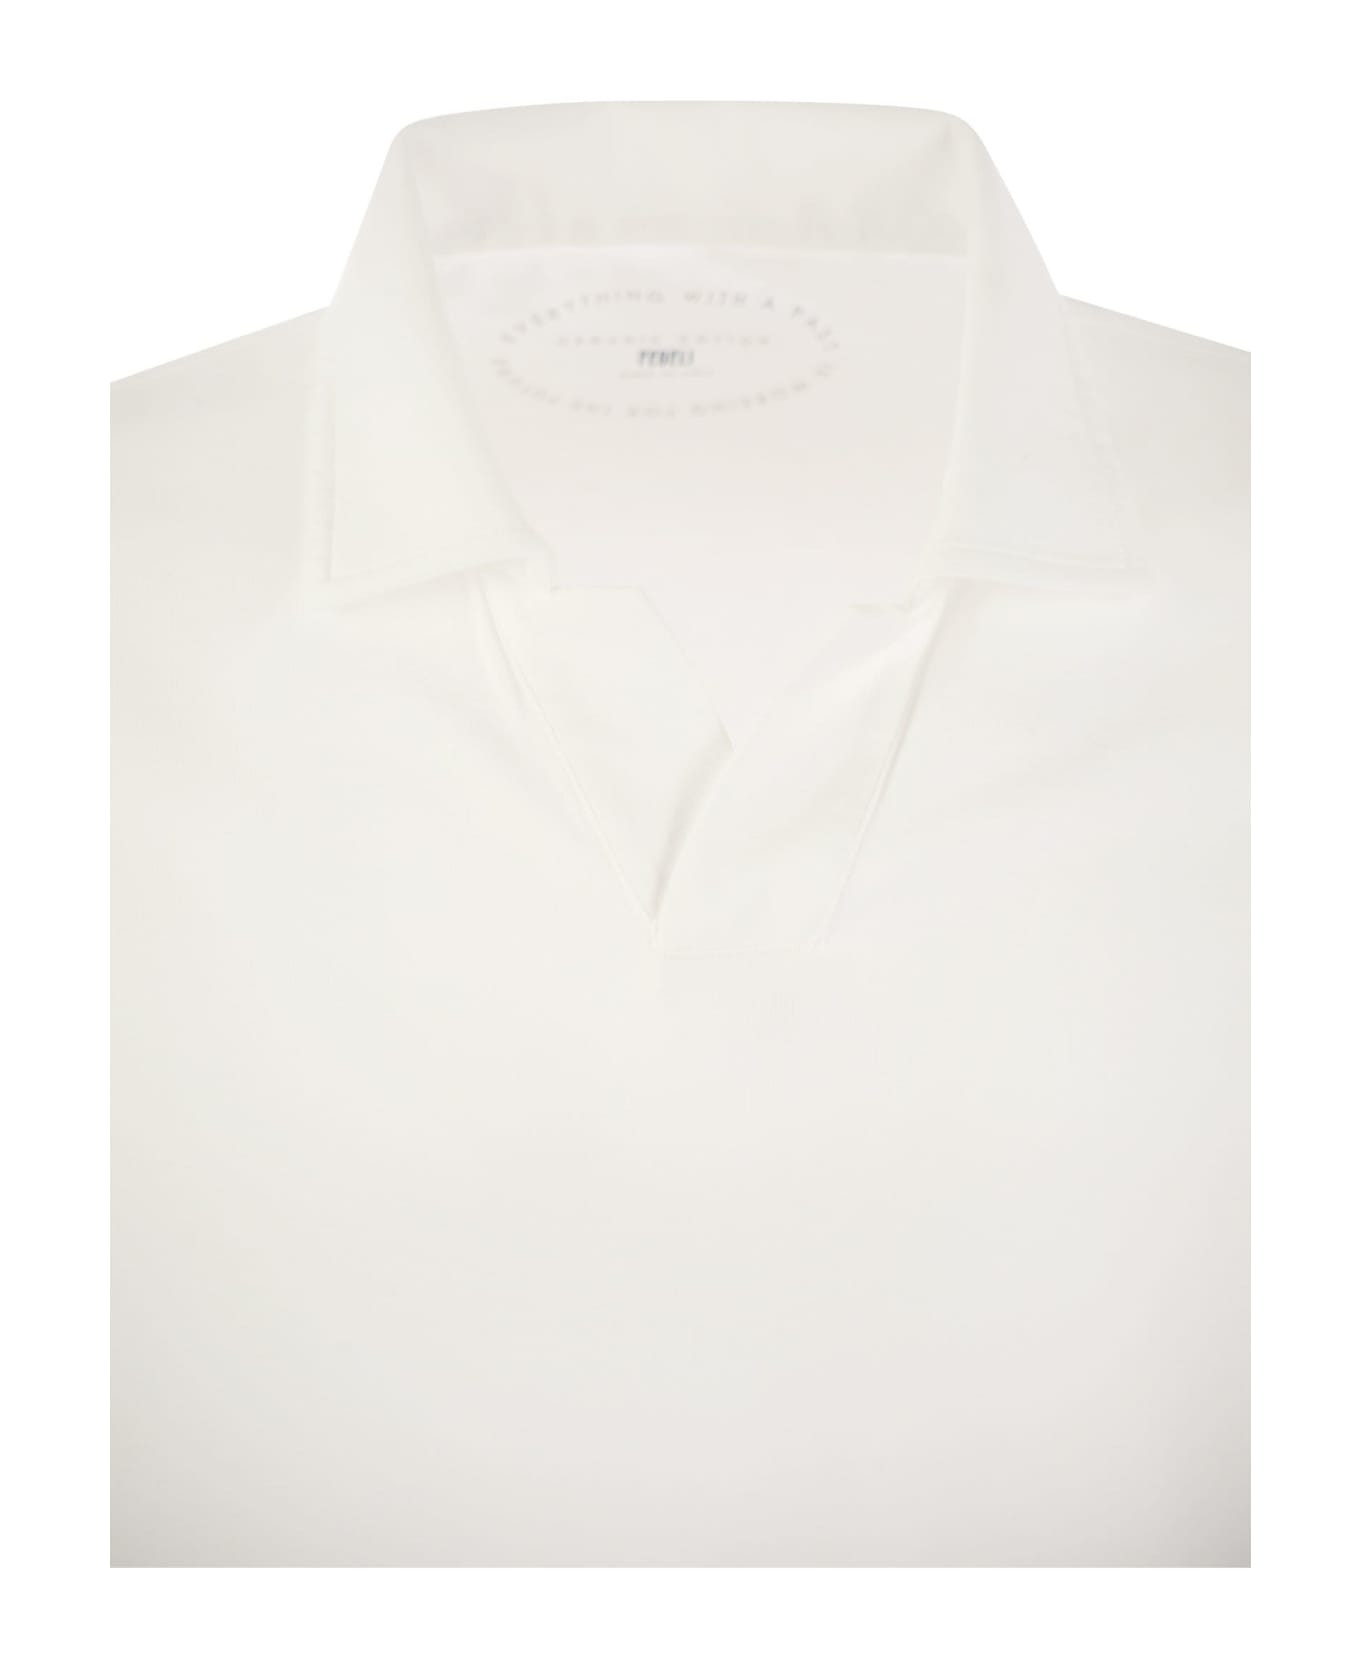 Fedeli Cotton Polo Shirt With Open Collar - Bianco ポロシャツ